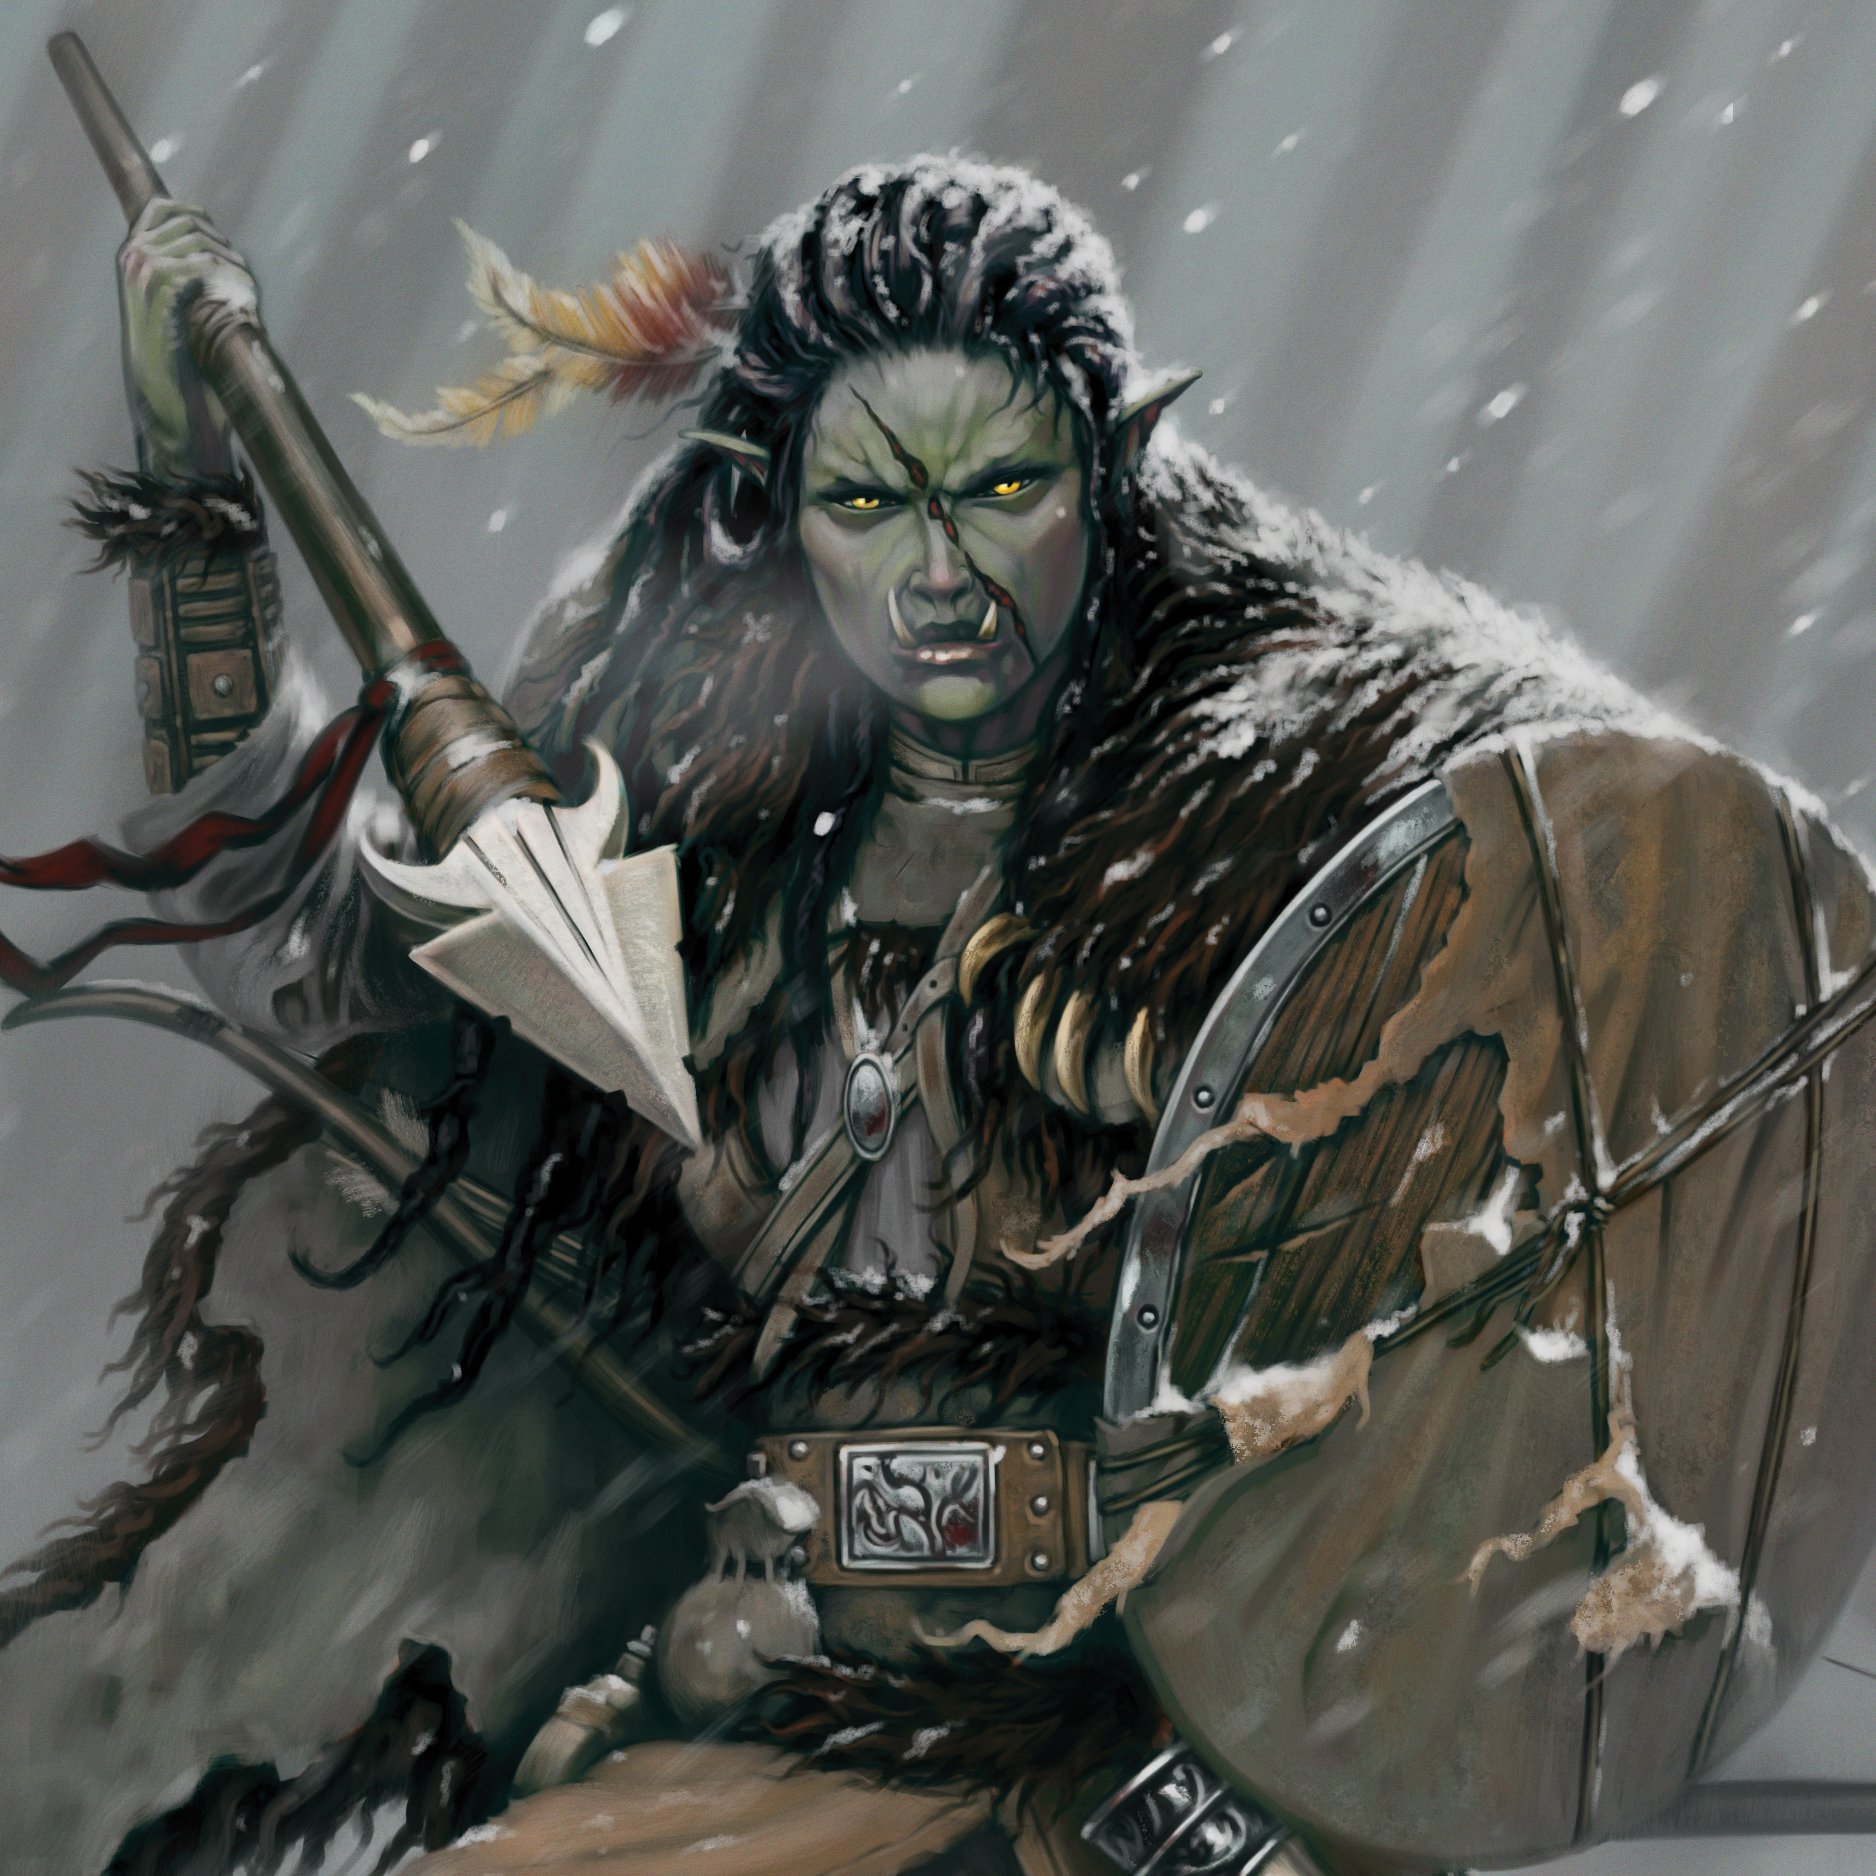 Find out, in the best selling #DnD5e adventure, Hunted! 